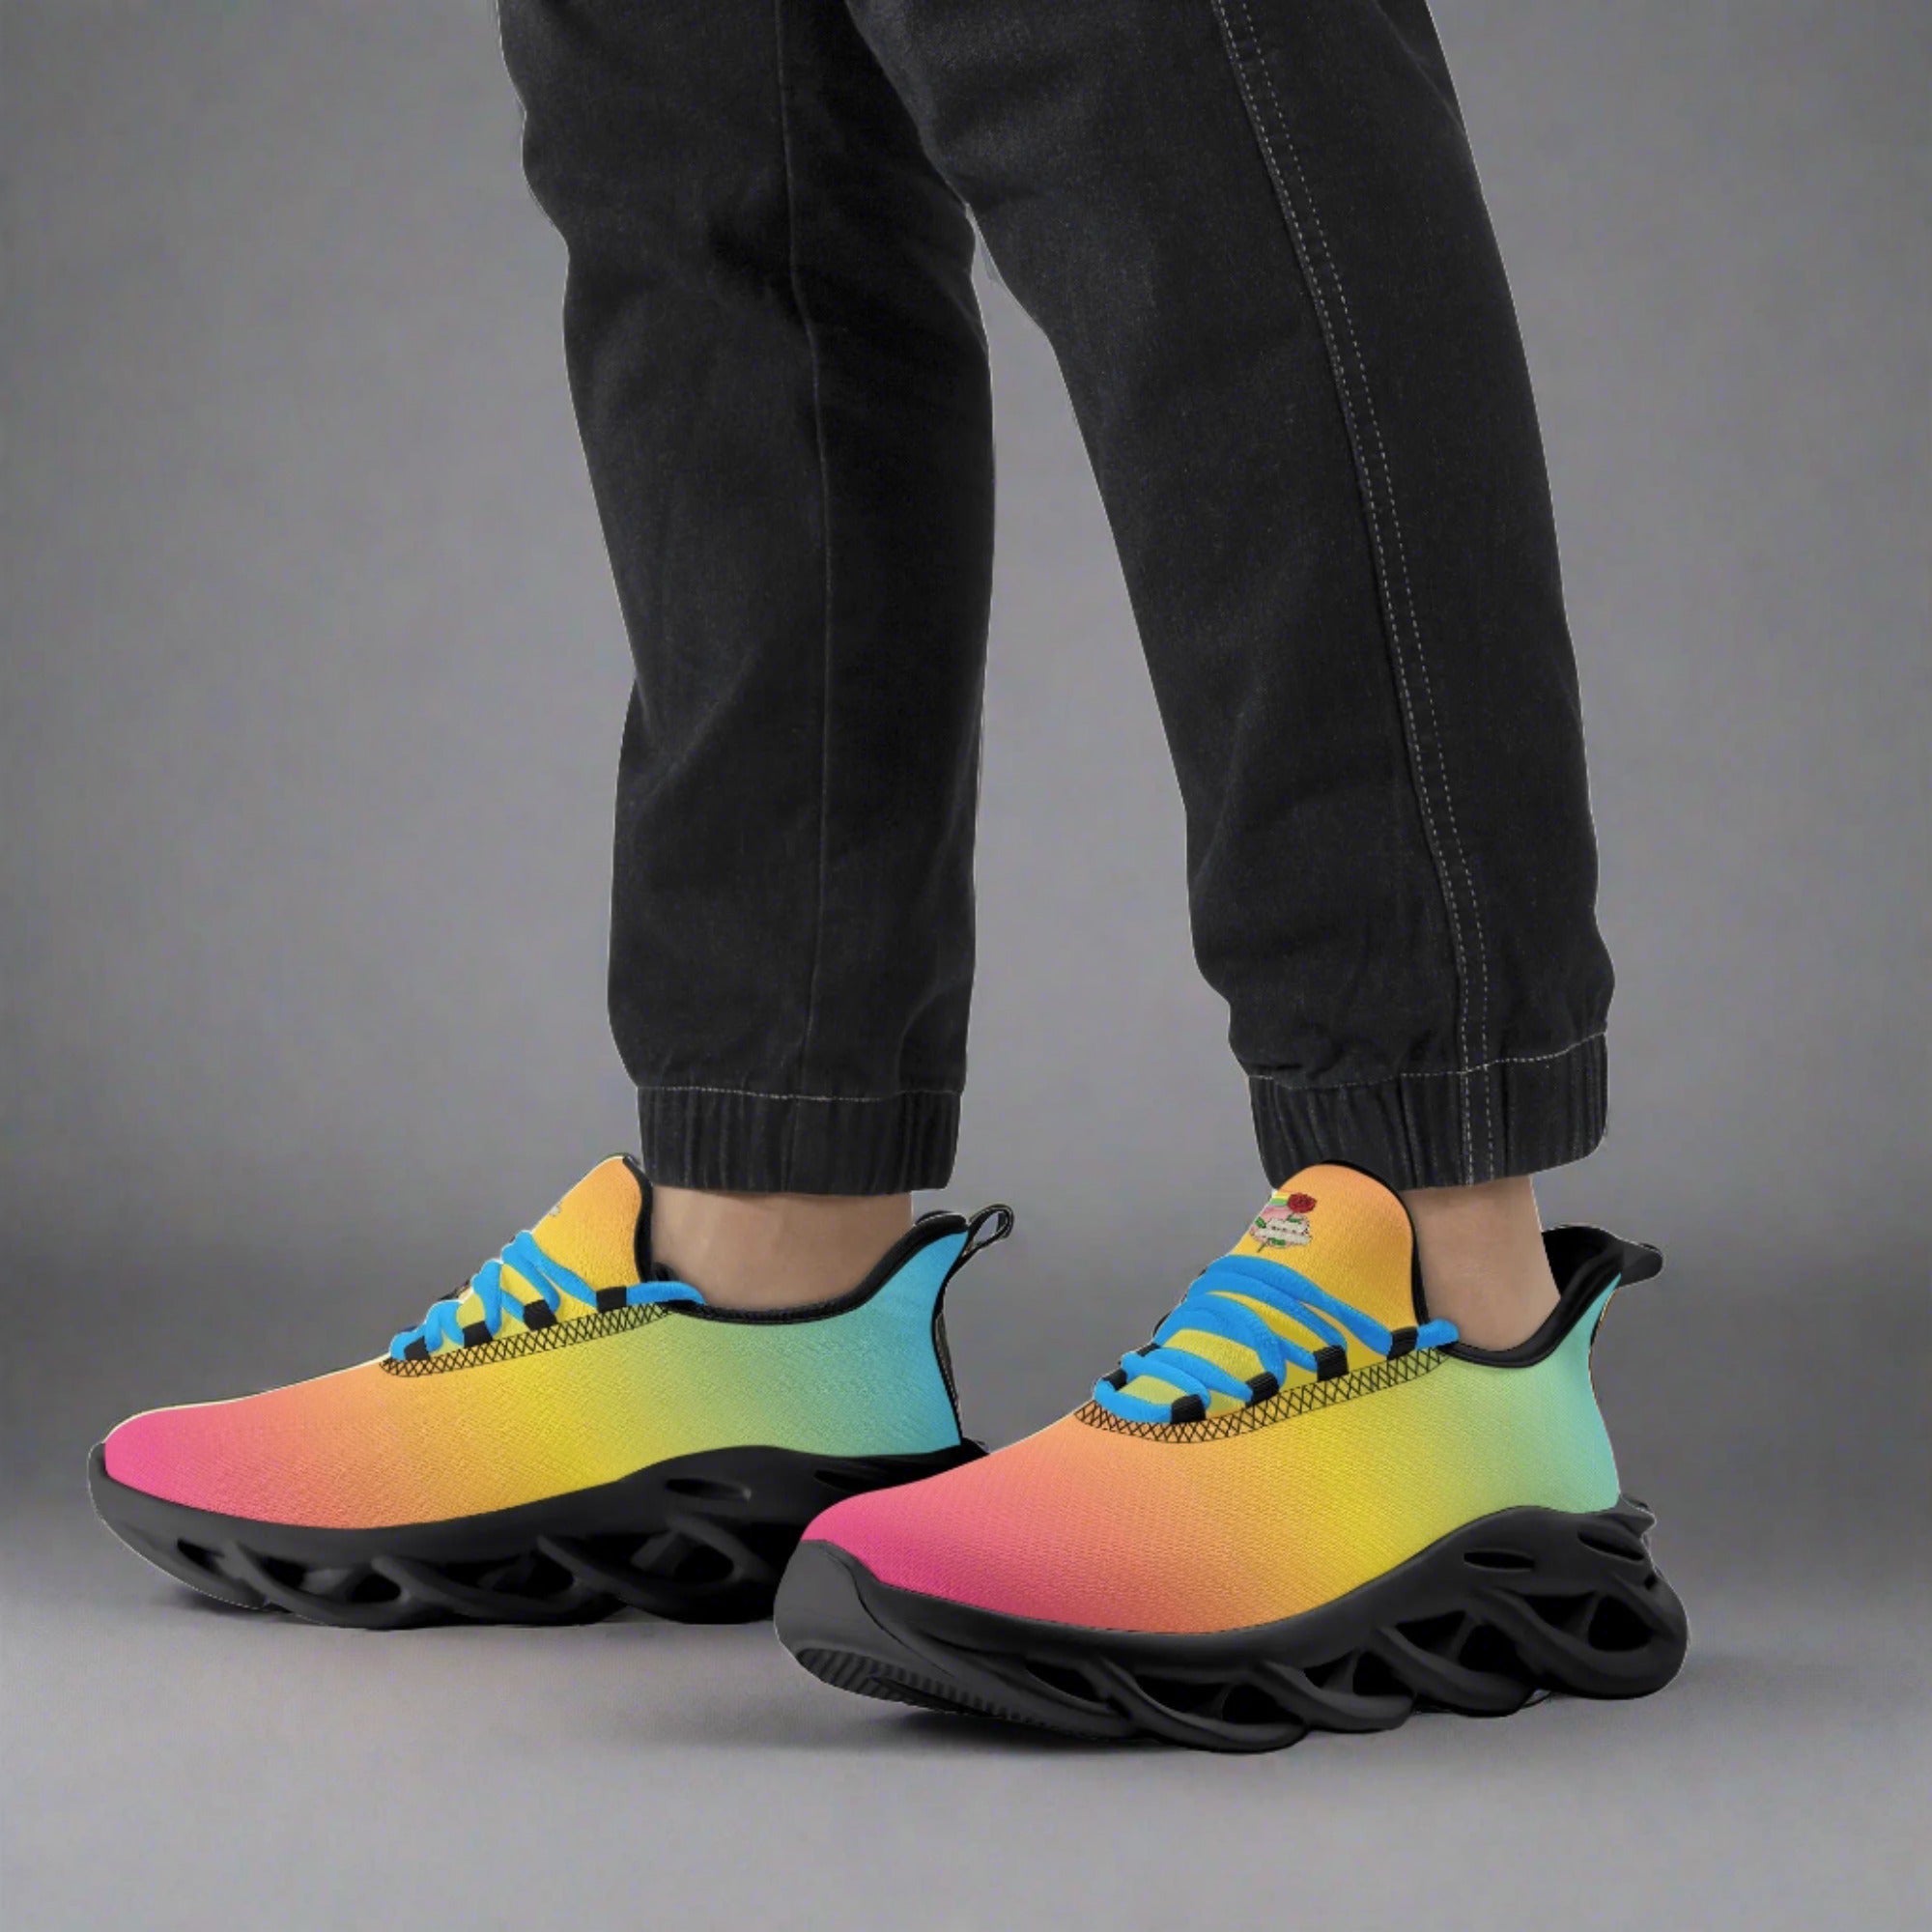 LGBT_Pride-Pansexual M-sole Running Shoes (Men Size) - Rose Gold Co. Shop